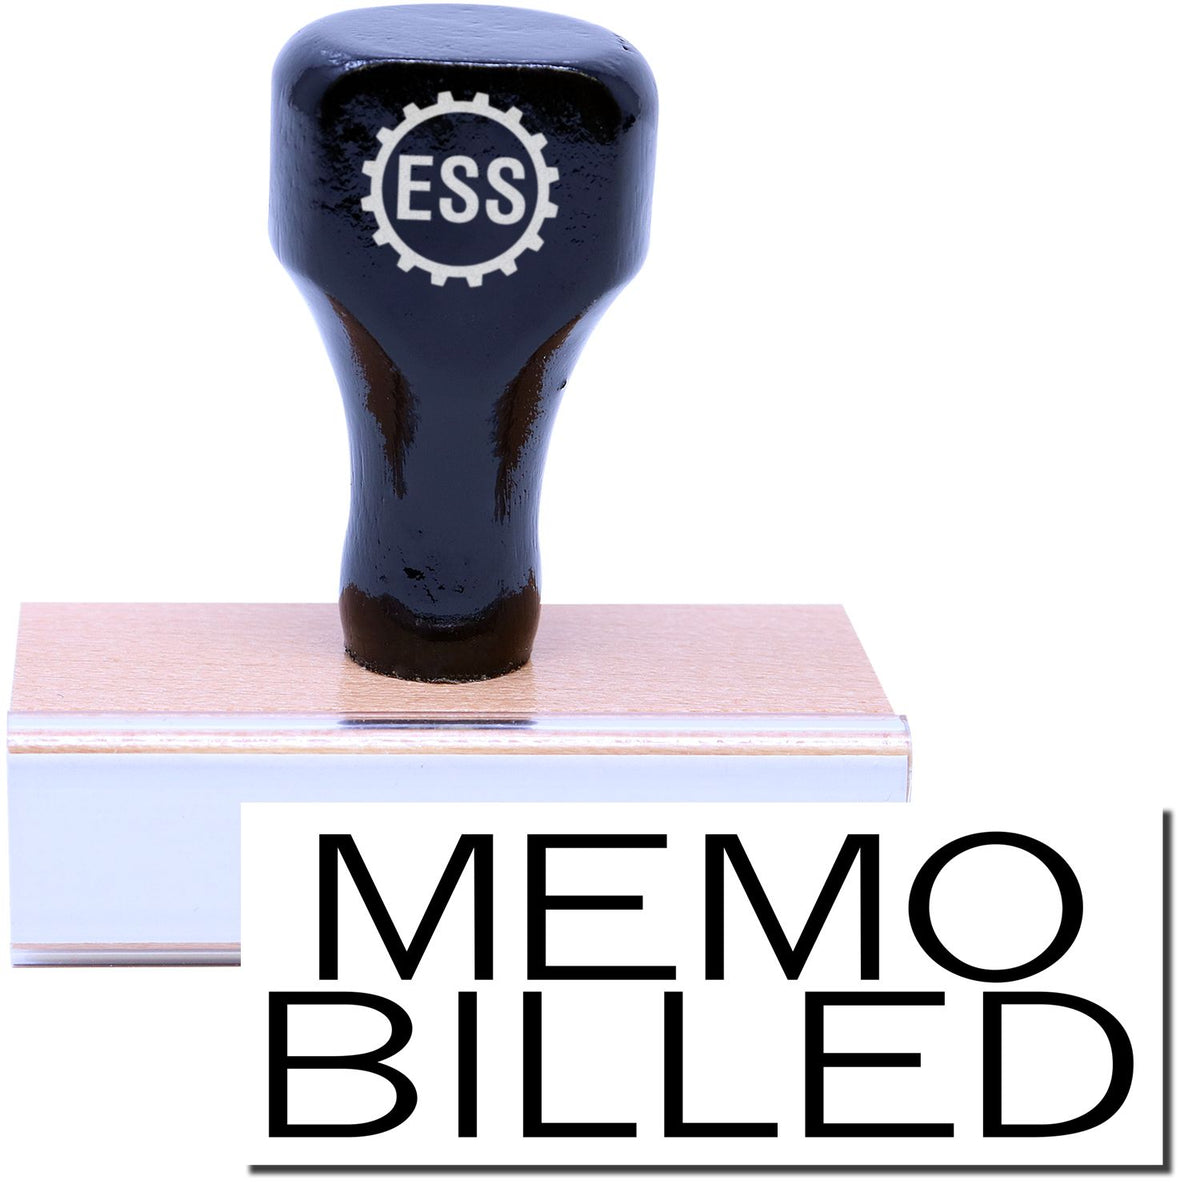 A stock office rubber stamp with a stamped image showing how the text &quot;MEMO BILLED&quot; is displayed after stamping.